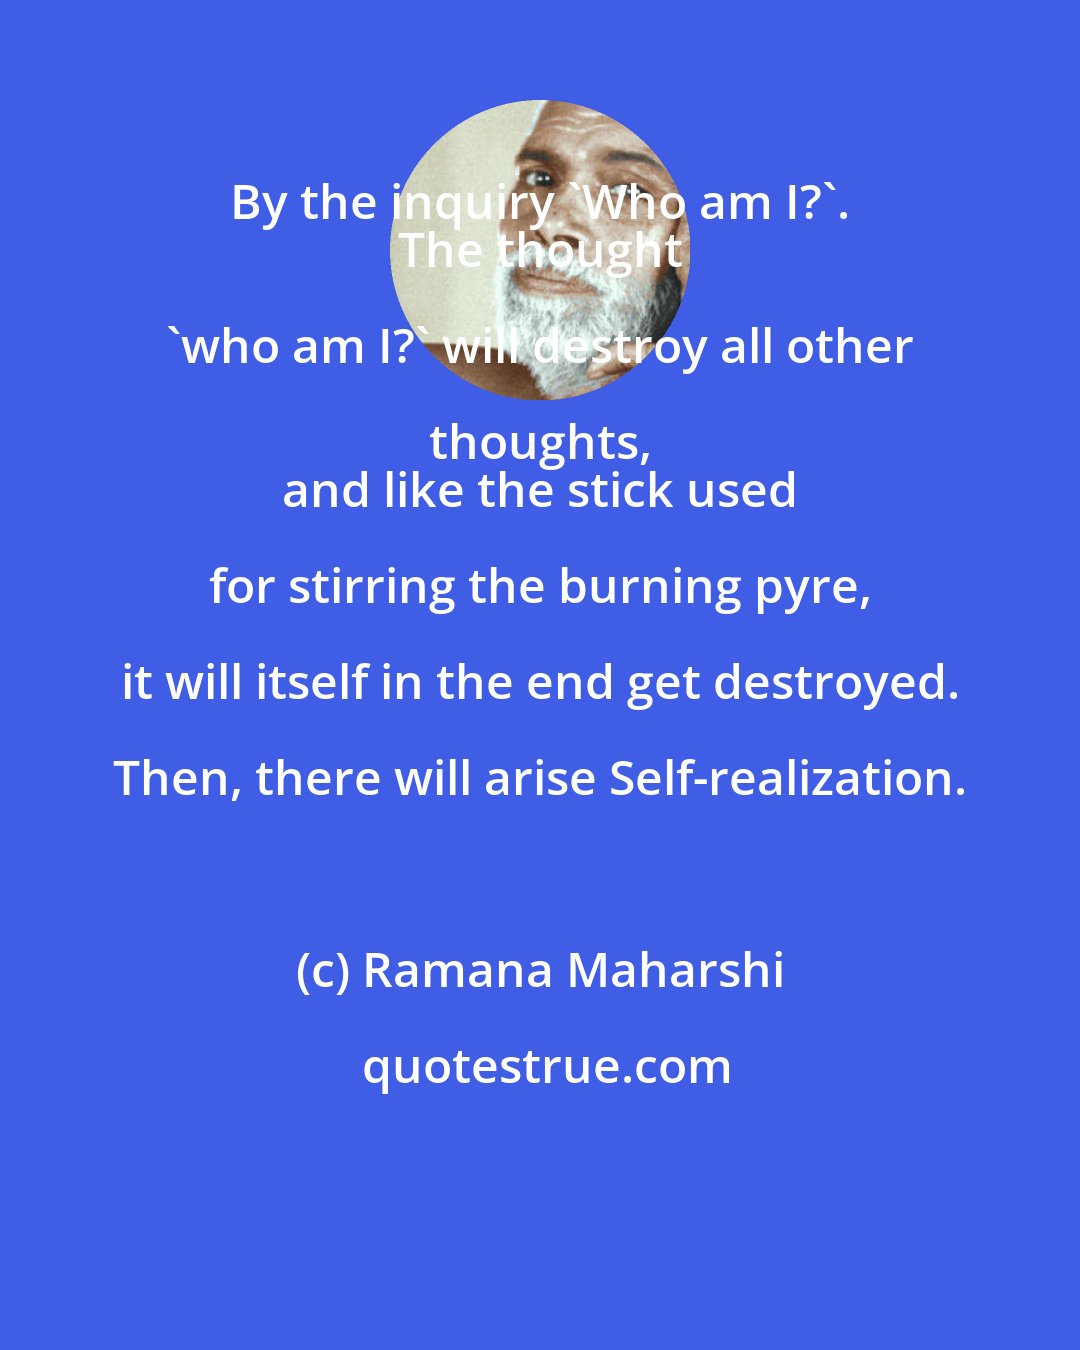 Ramana Maharshi: By the inquiry 'Who am I?'. 
 The thought 'who am I?' will destroy all other thoughts, 
 and like the stick used for stirring the burning pyre, it will itself in the end get destroyed. Then, there will arise Self-realization.